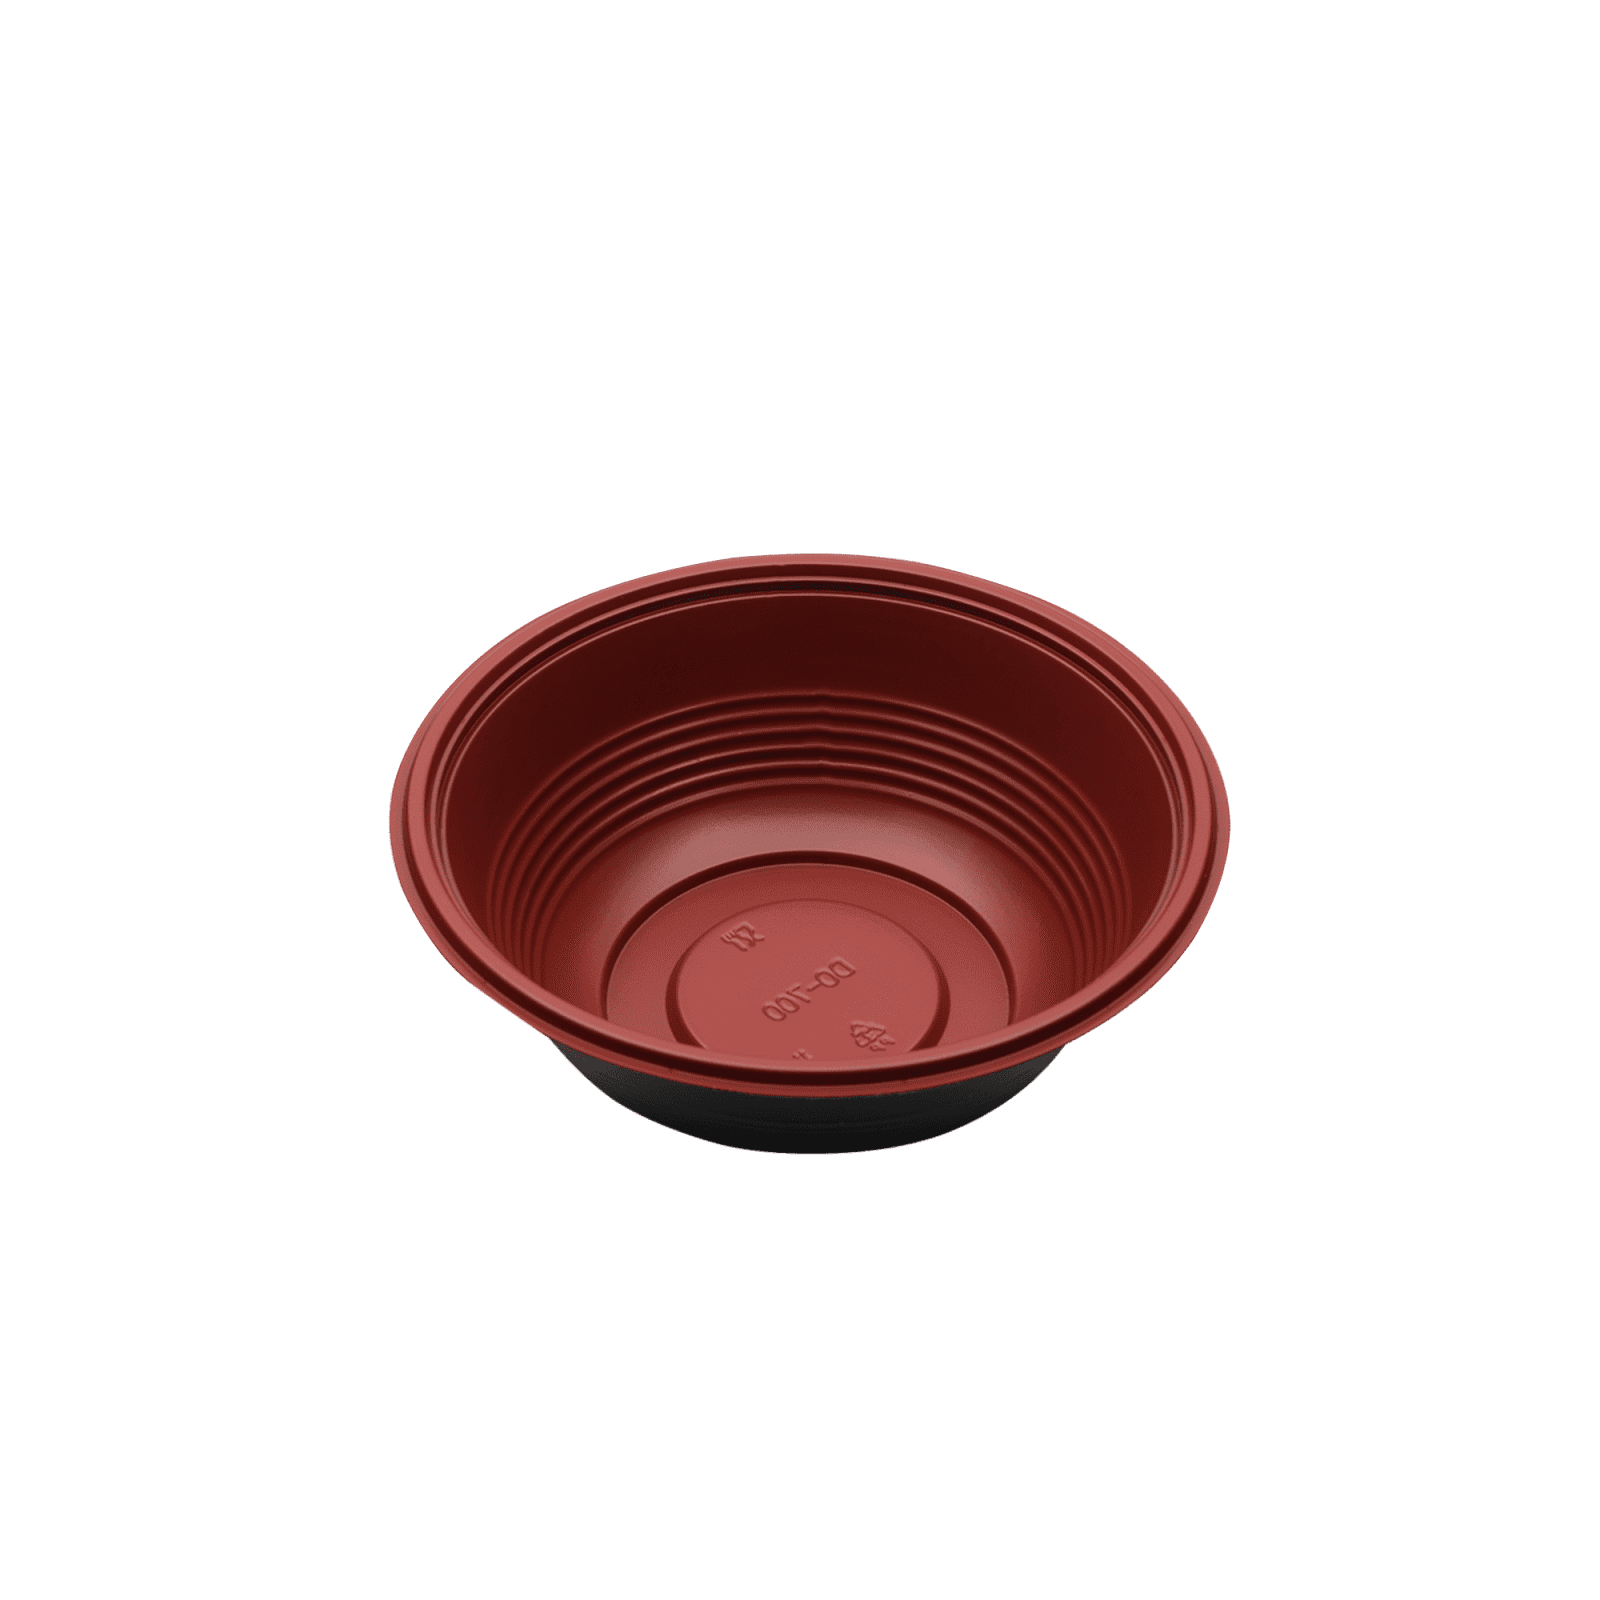 Enpak microwave to go donburi bowls with clear lids 700ml DO-700